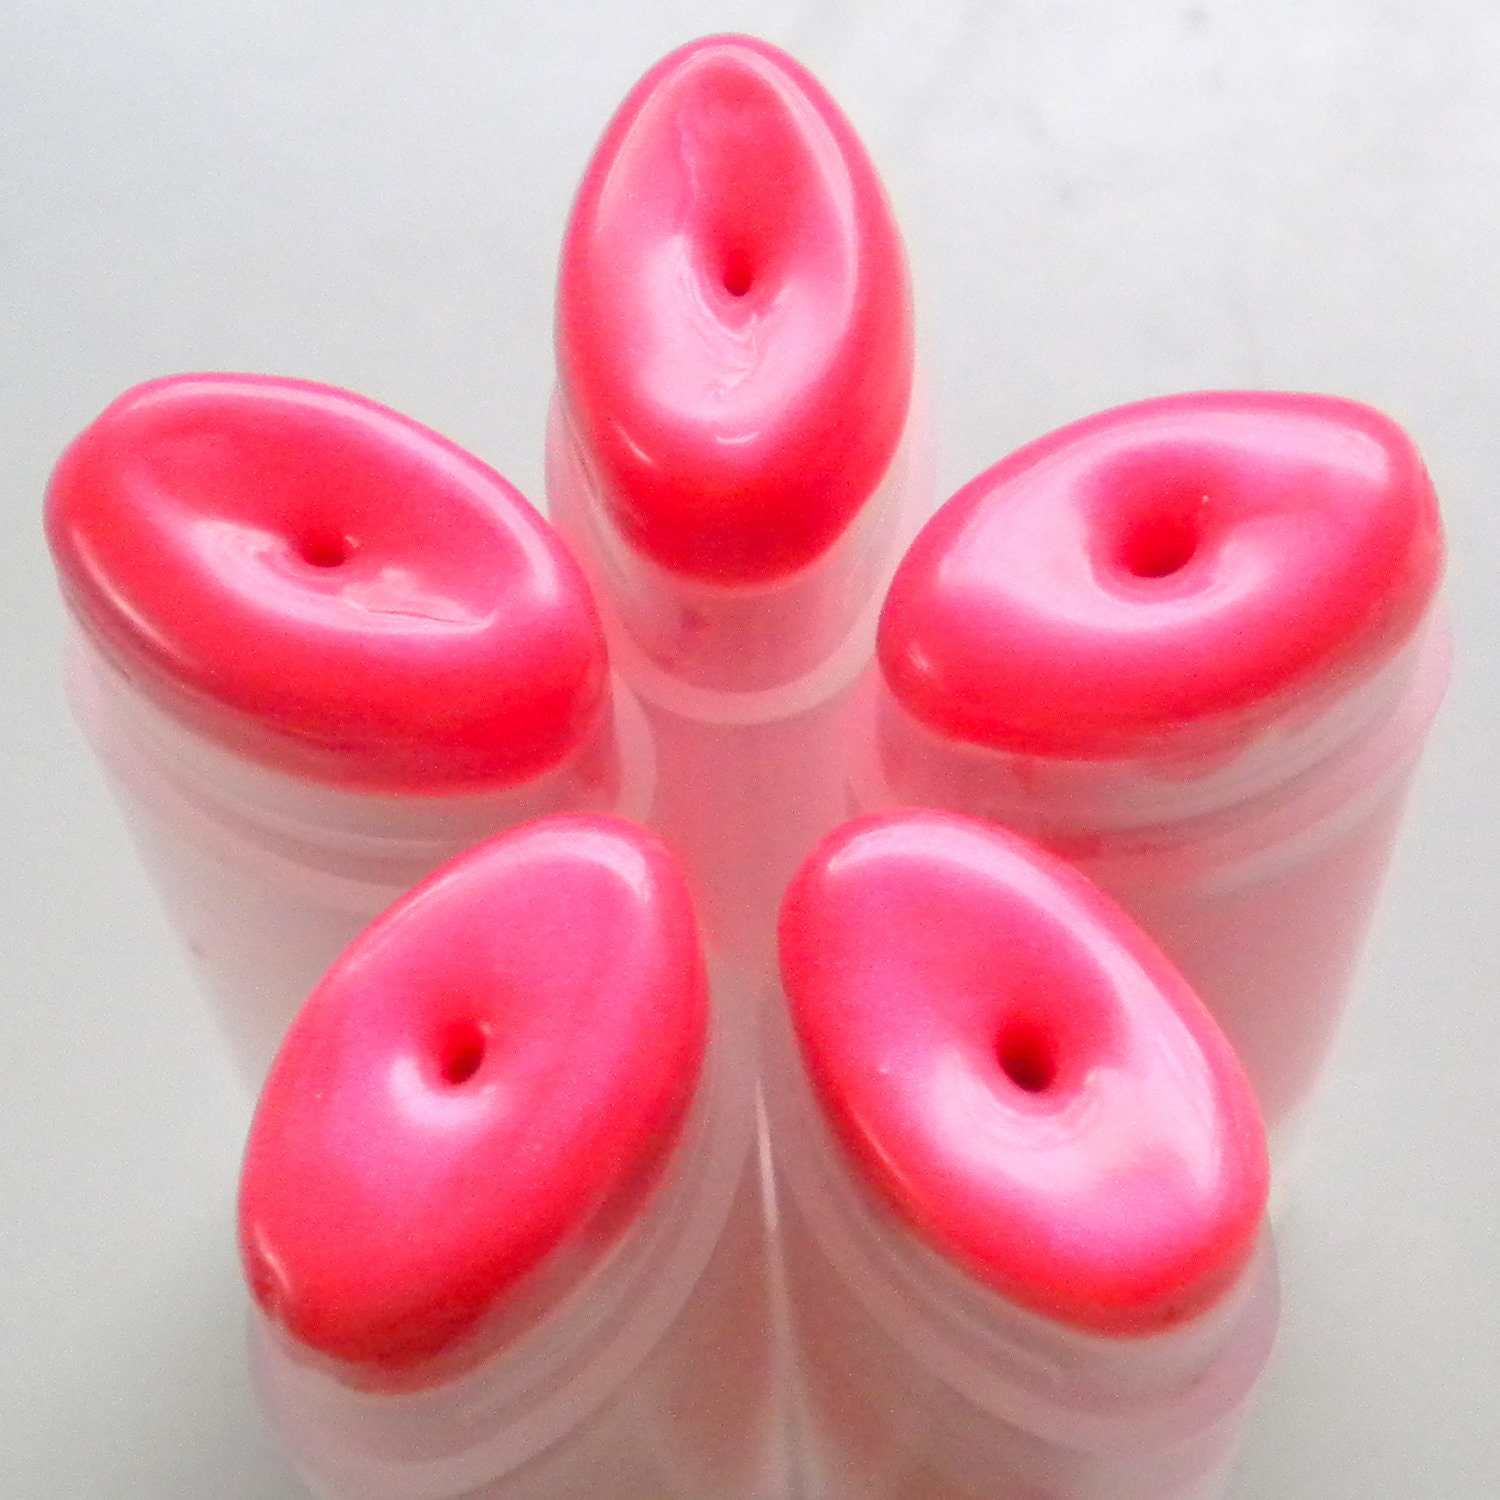 Mineral Lip Tint in PINK, Vegan, ALL NATURAL Moisturizing Treatment with Organic Shea Butter - On Sale